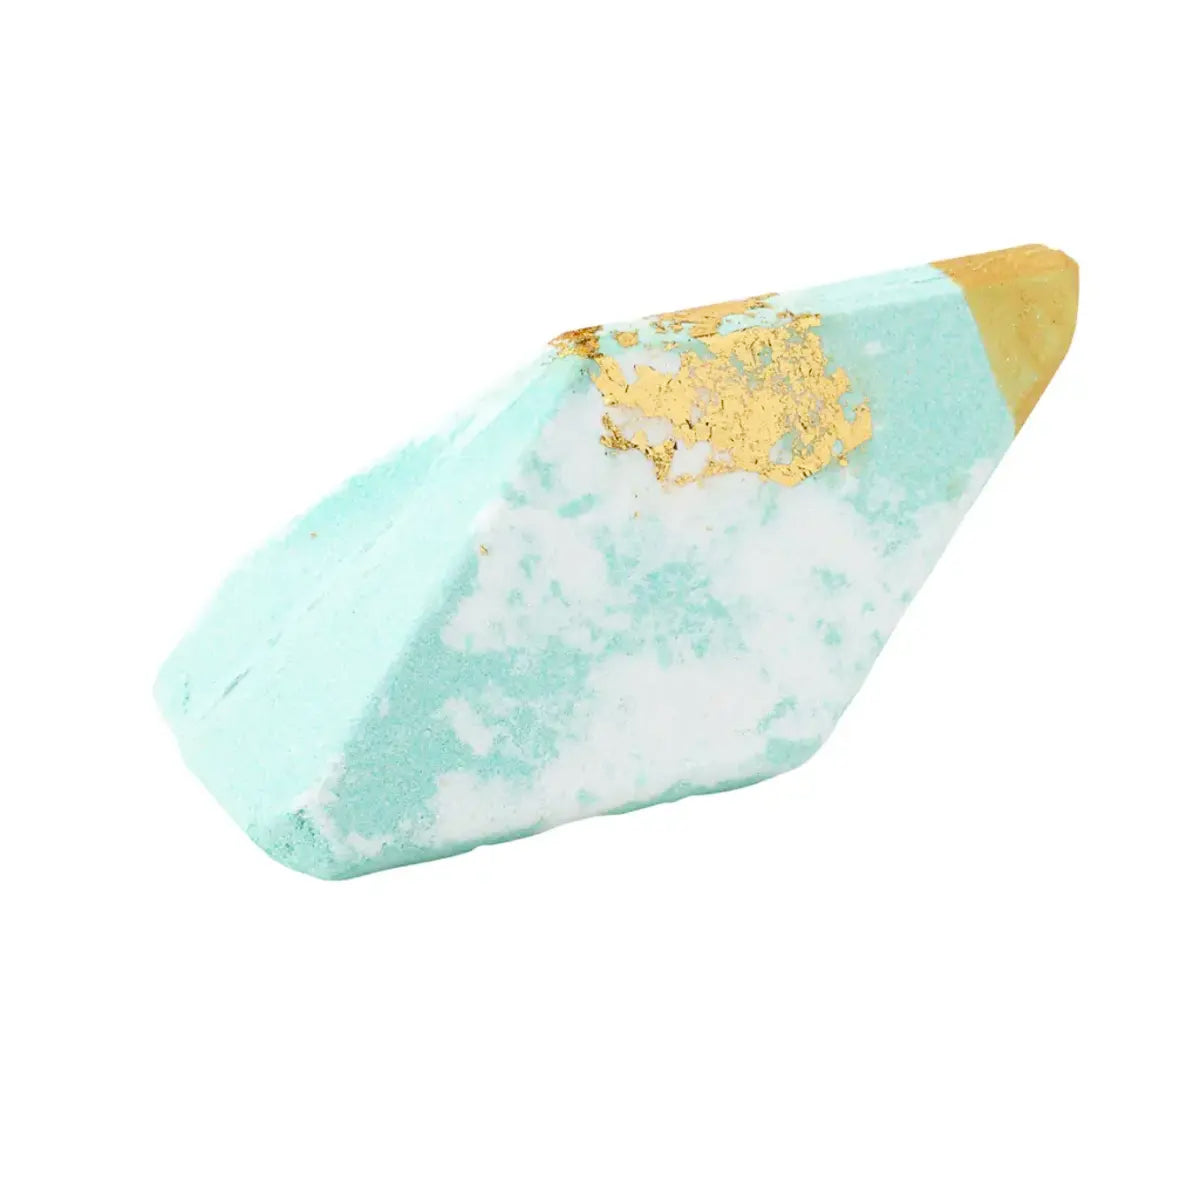 A Crystal Bath Bomb - Aquamarine - Lemongrass soap infused with essential oils, featuring a delicate gold leaf, by Summer Salt Body.